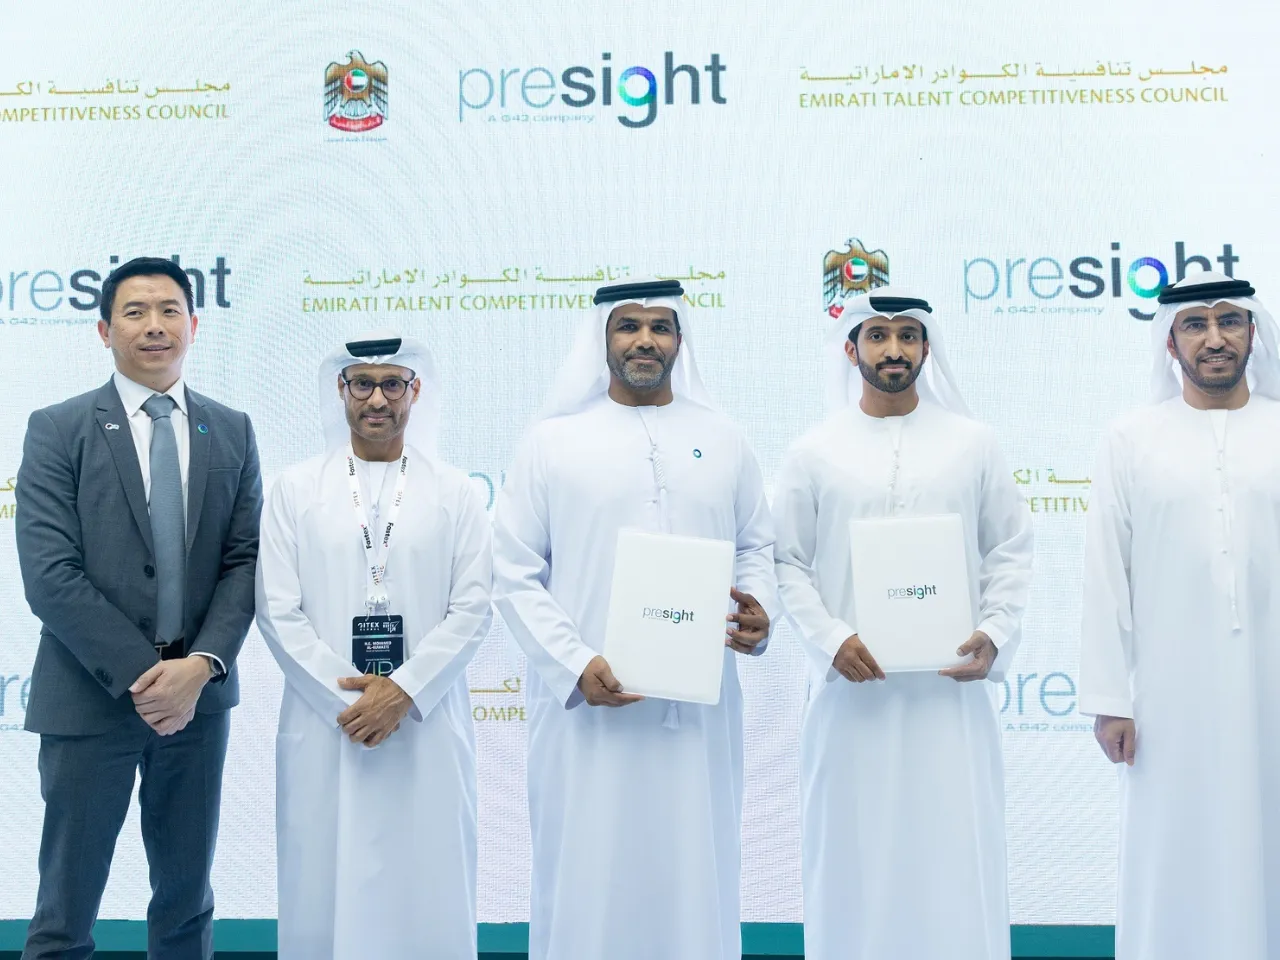 The Emirati Talent Competitiveness Council (ETCC) has announced the partnership with Presight